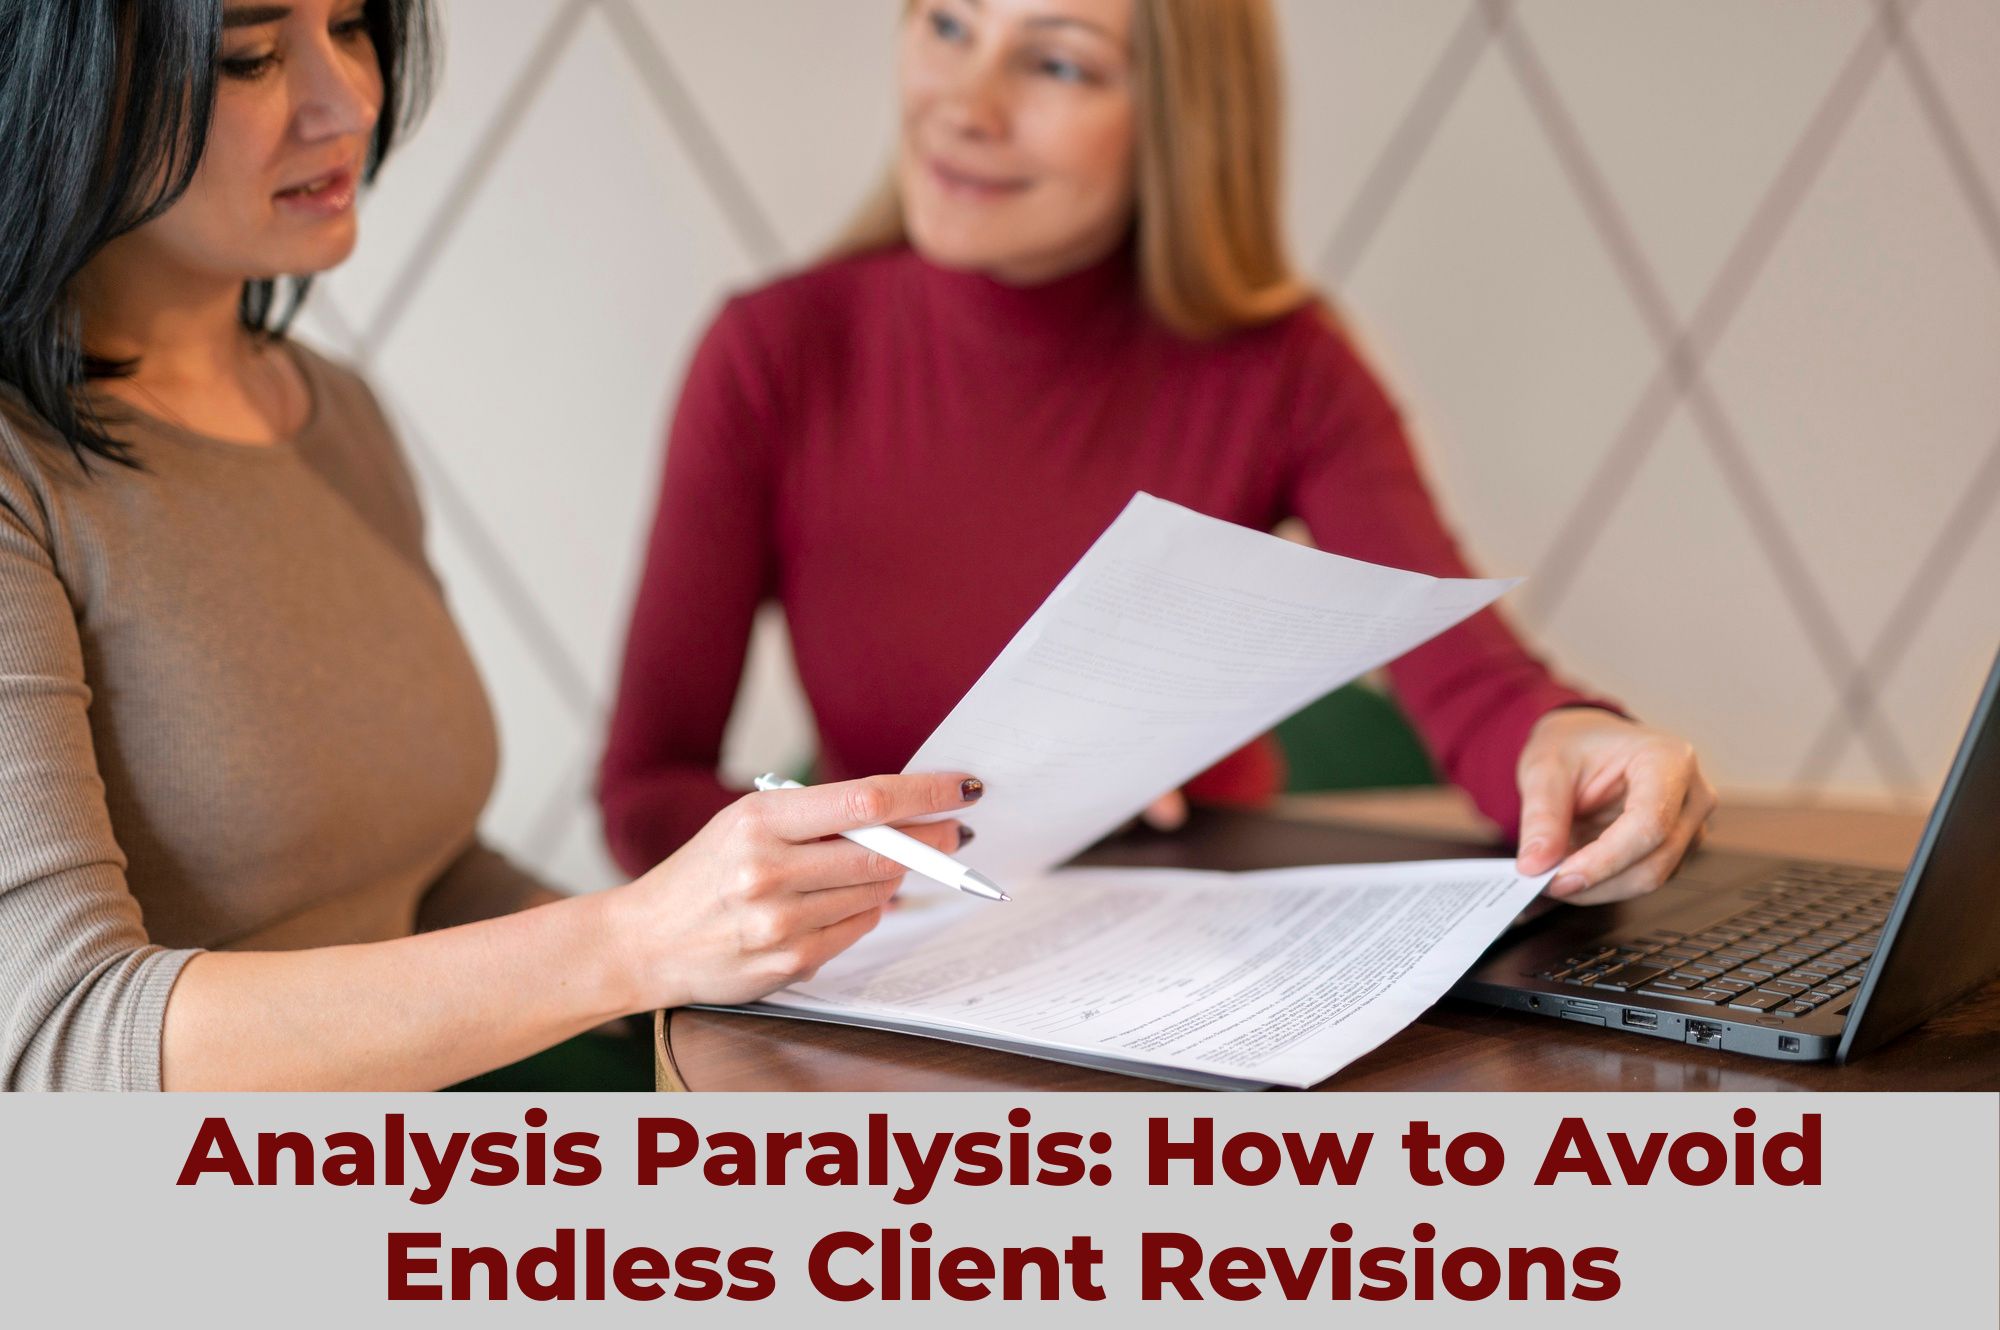 Avoiding Analysis Paralysis: A Freelance Copywriter’s Guide to Handling Endless Client Revisions